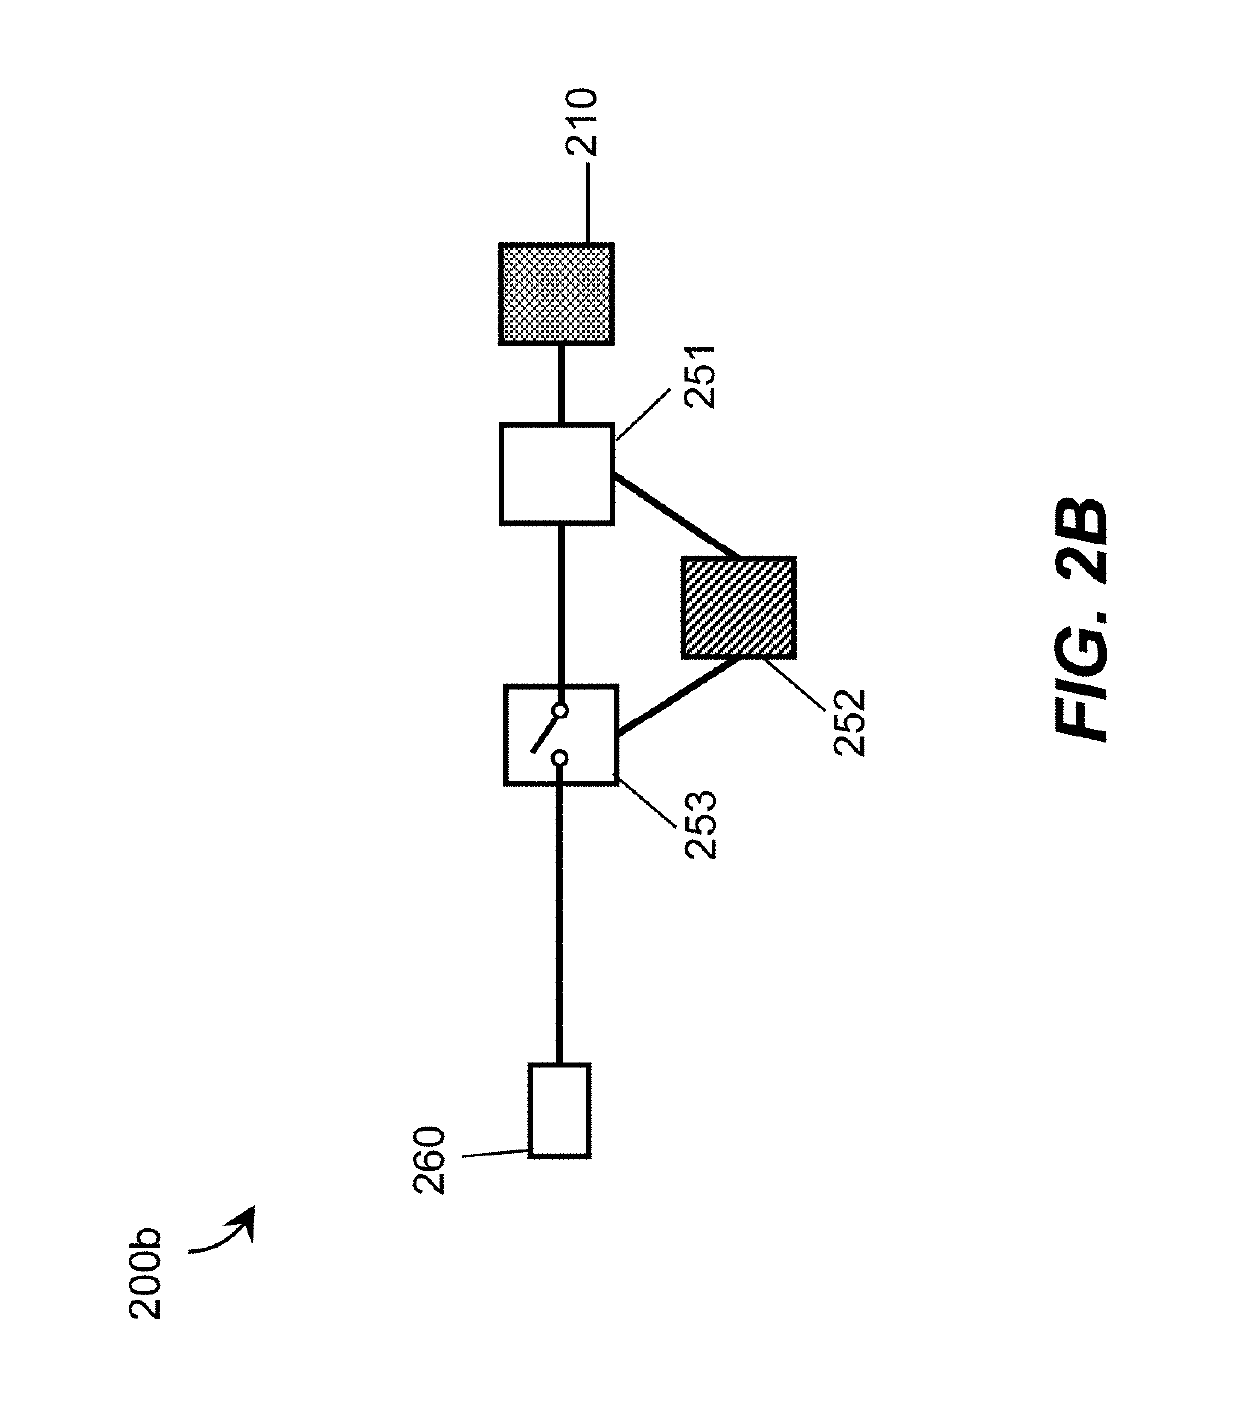 Systems, devices, and methods for laser projectors